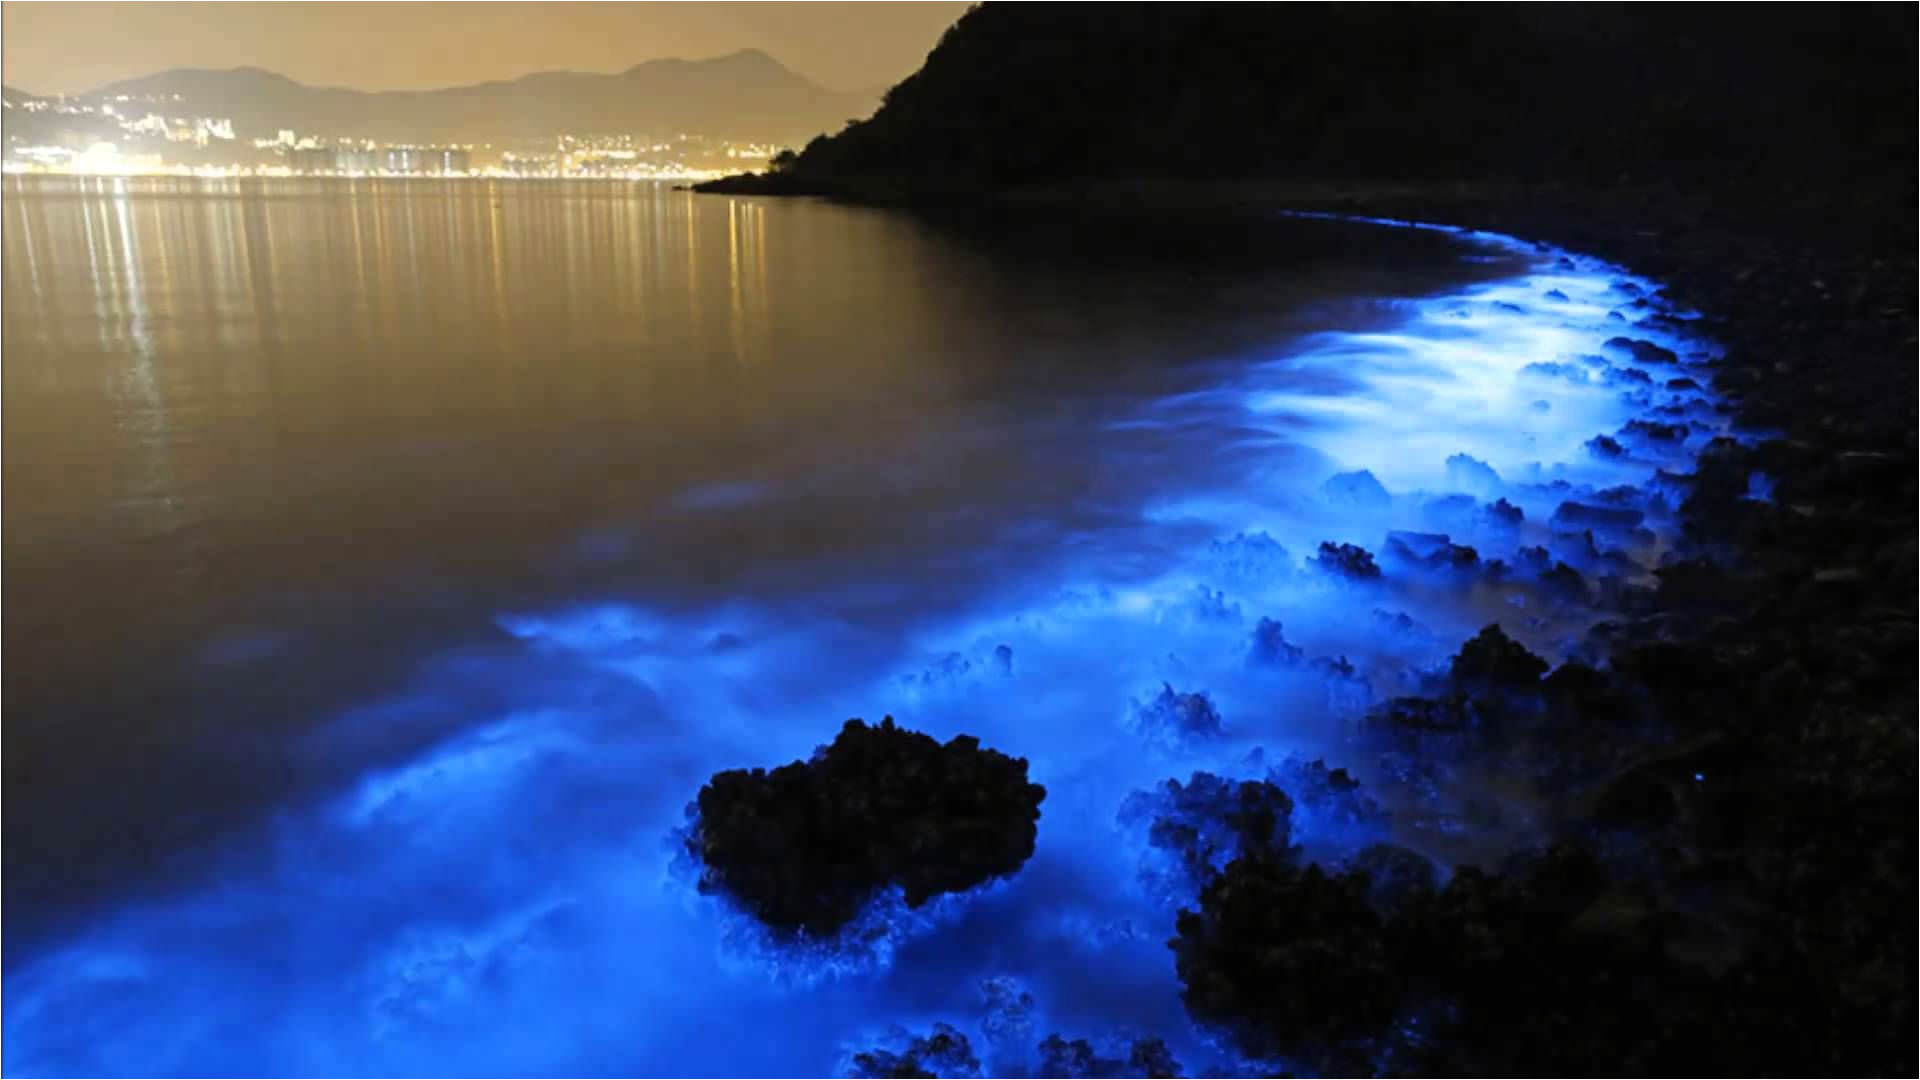 hong kong seas glow blue from bioluminescent plankton caused by pollution https visit